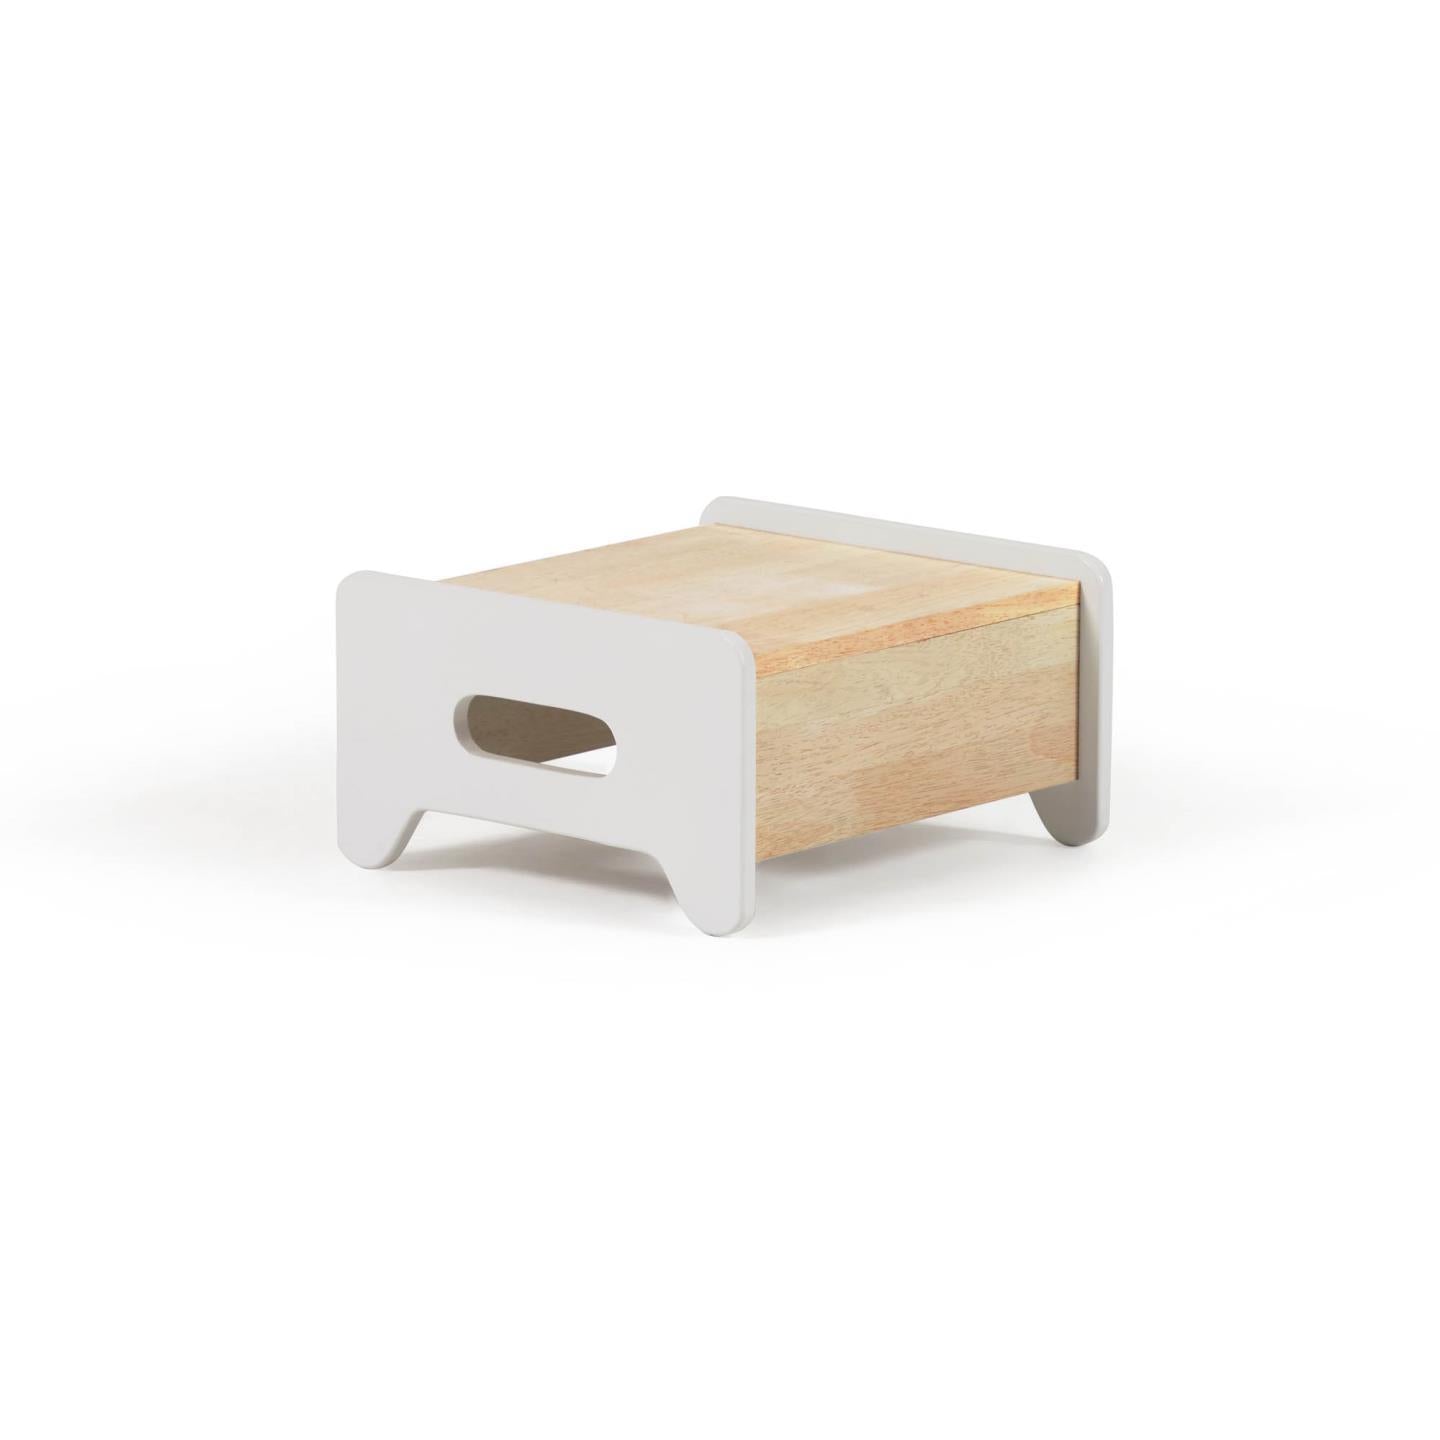 Cecilia kids’ step-stool in solid natural and white FSC MIX Credit pine